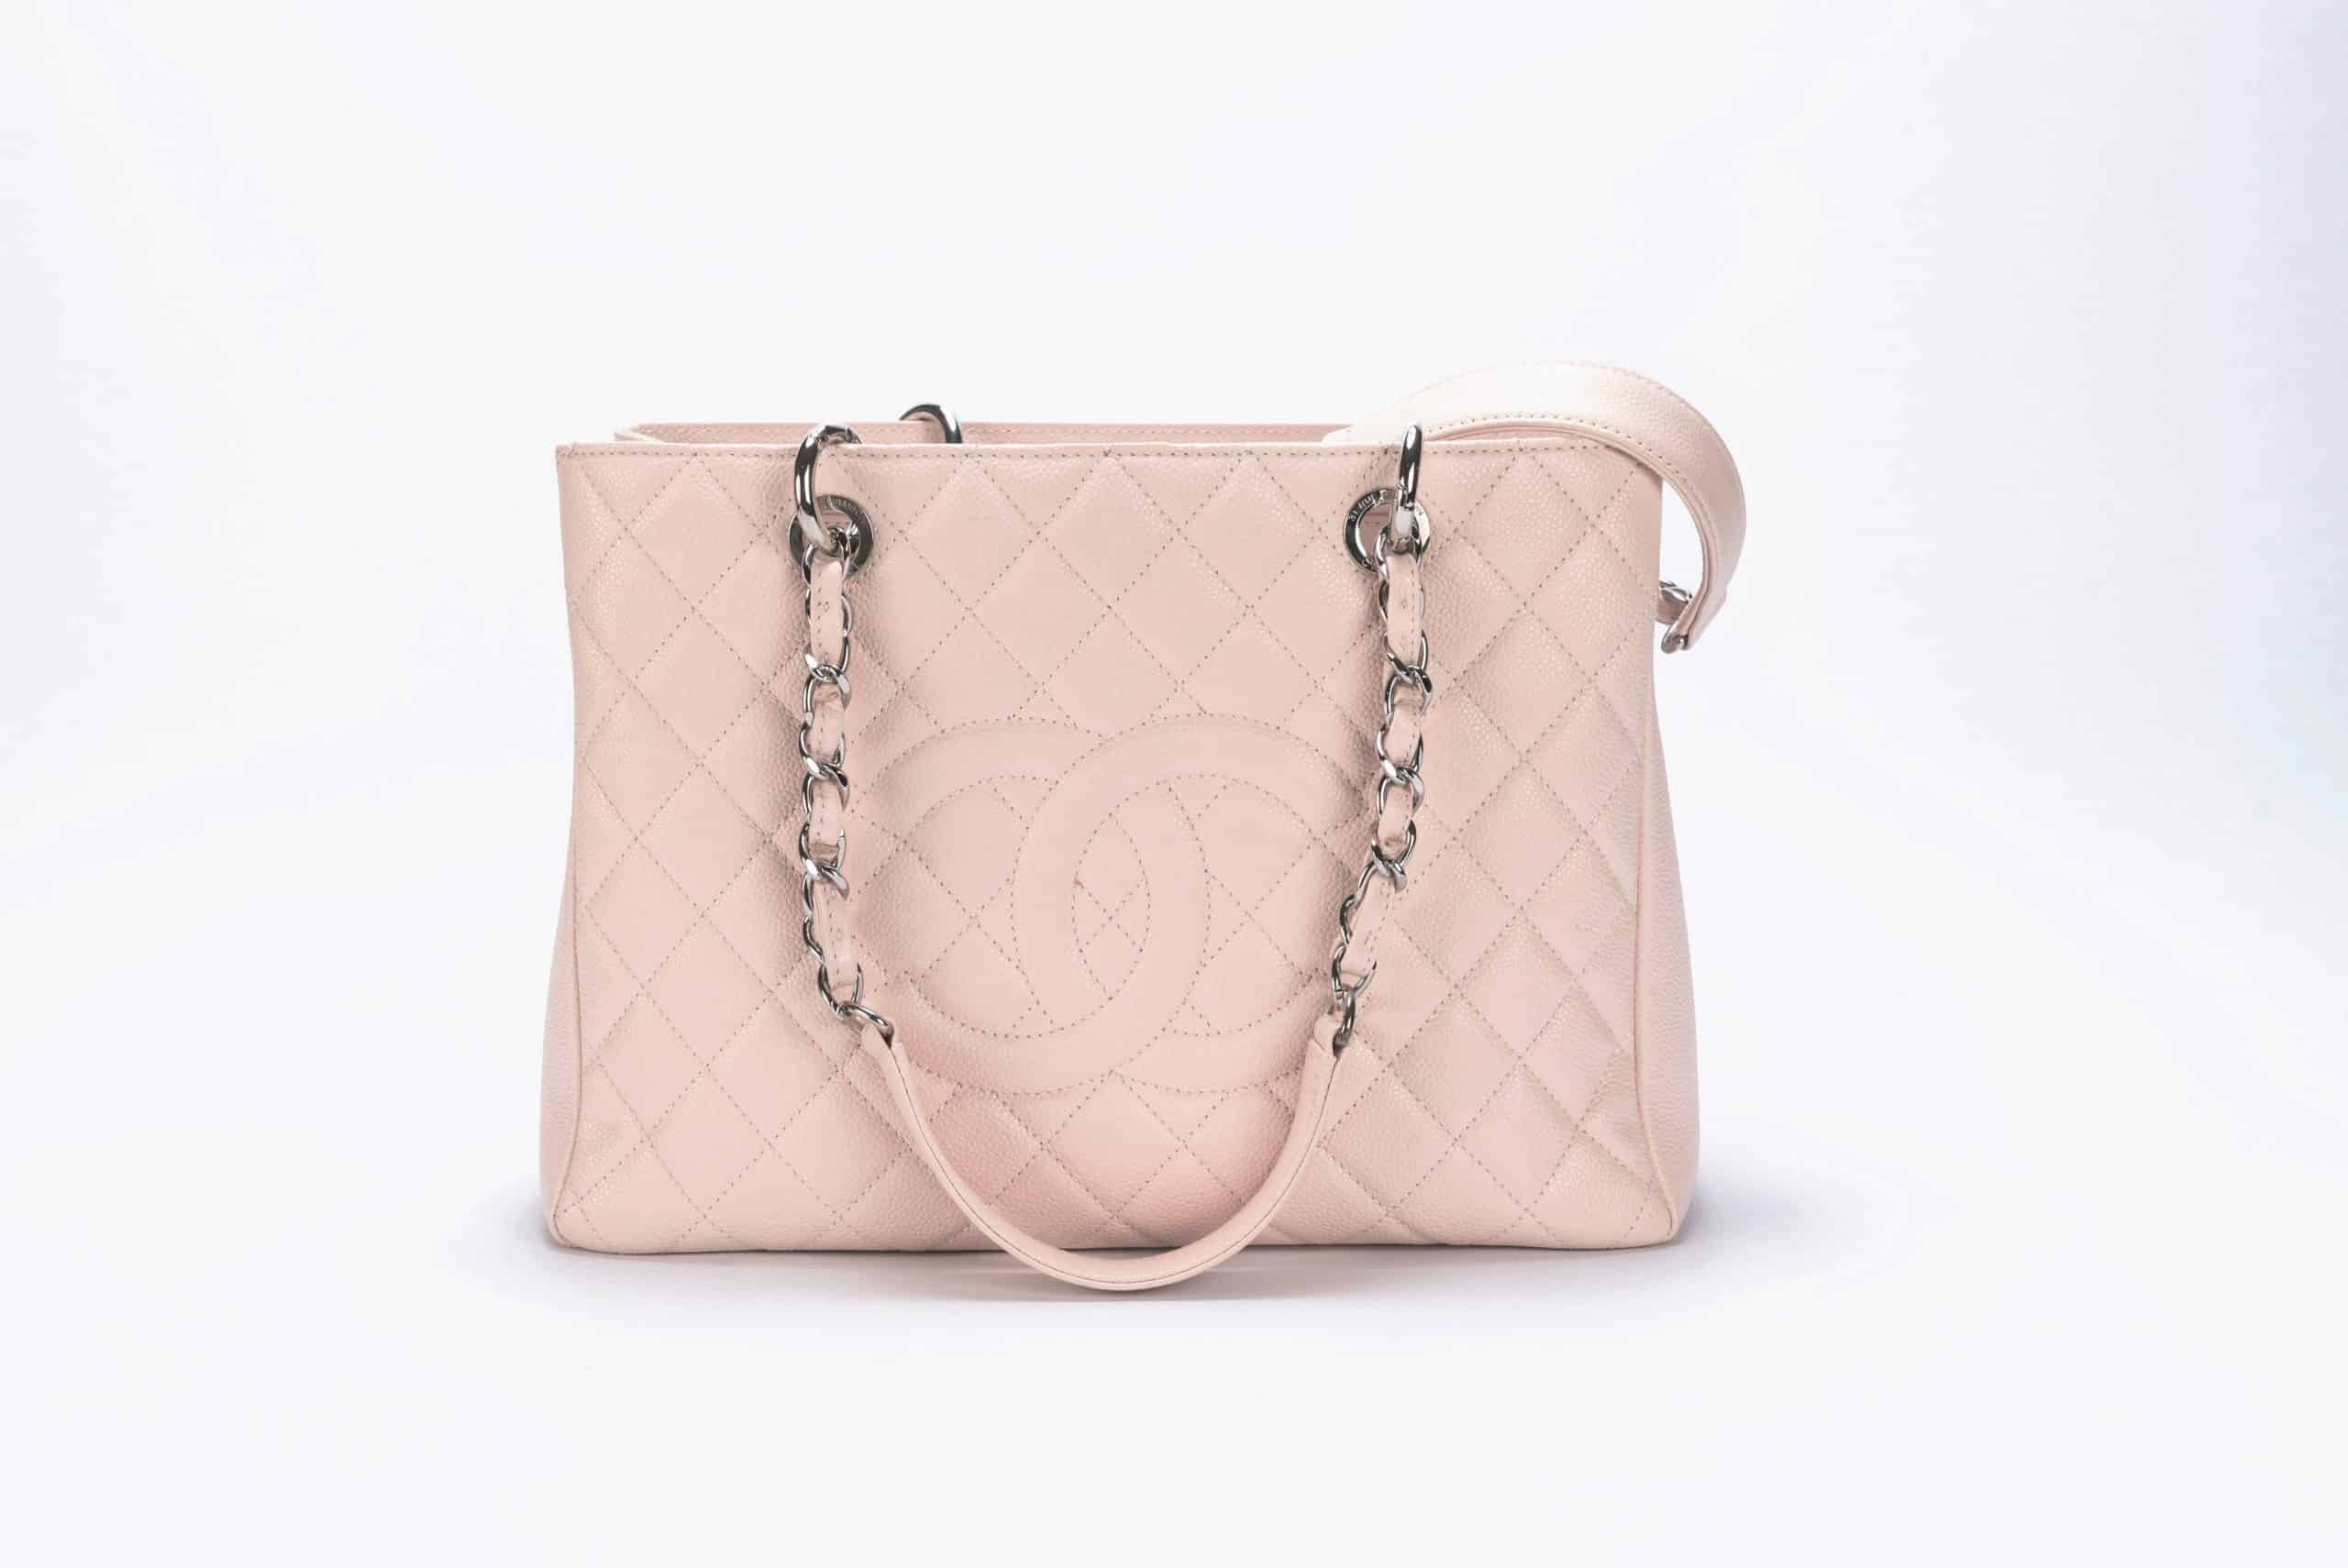 Chanel GST Caviar Quilted Bag in Light Pink with Silver Hardware (4)